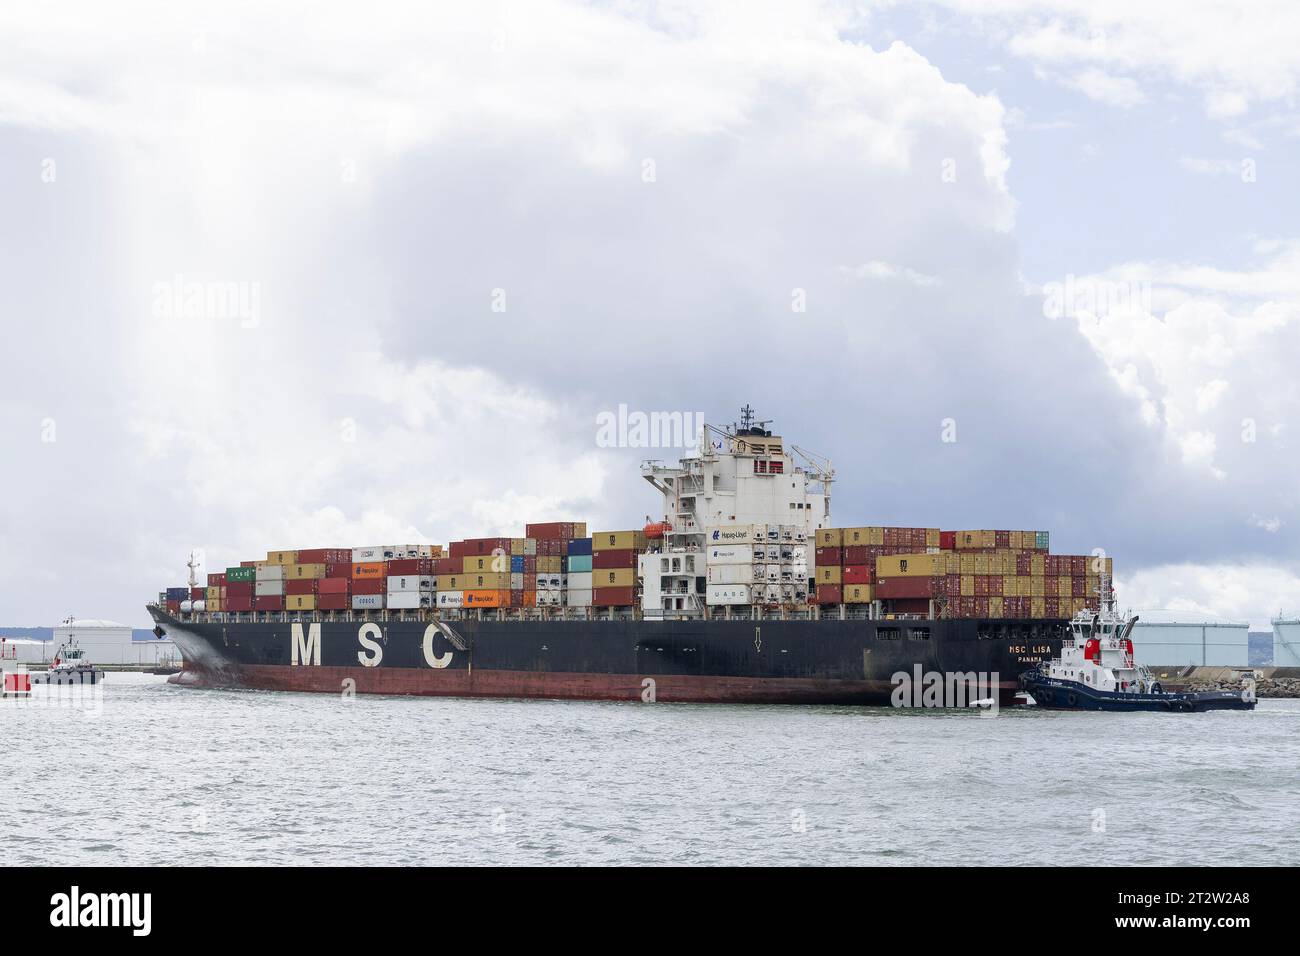 Le Havre, France - Container Ship MSC LISA arriving port of Le Havre with tugboats. Stock Photo